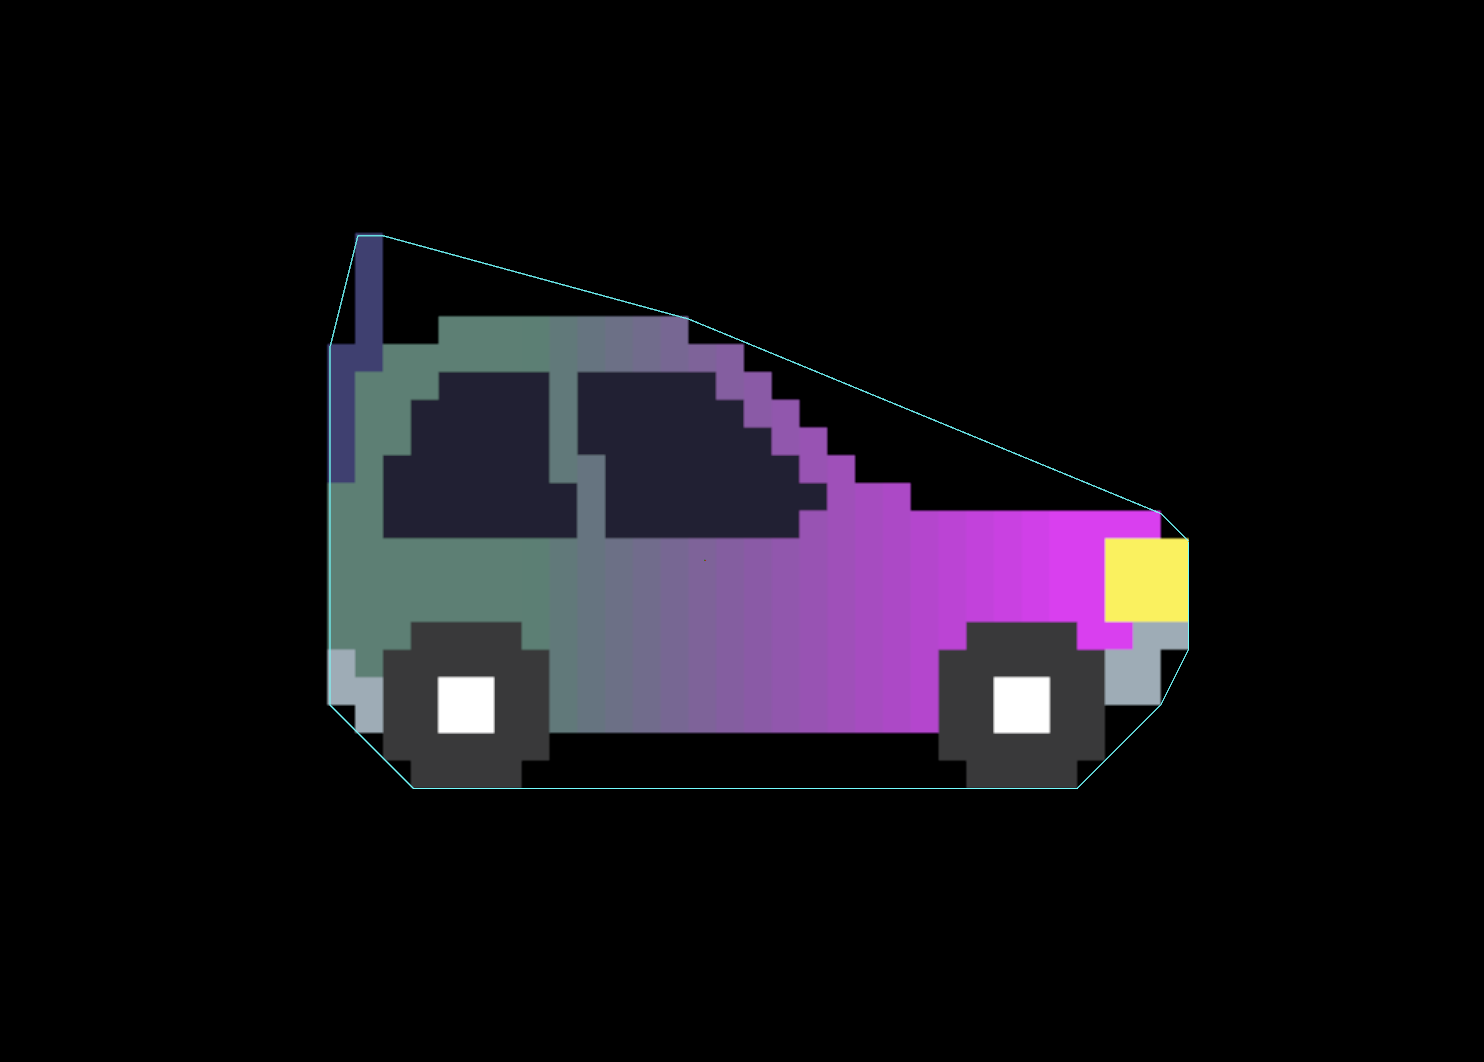 convex hull collider on an upside down car sprite